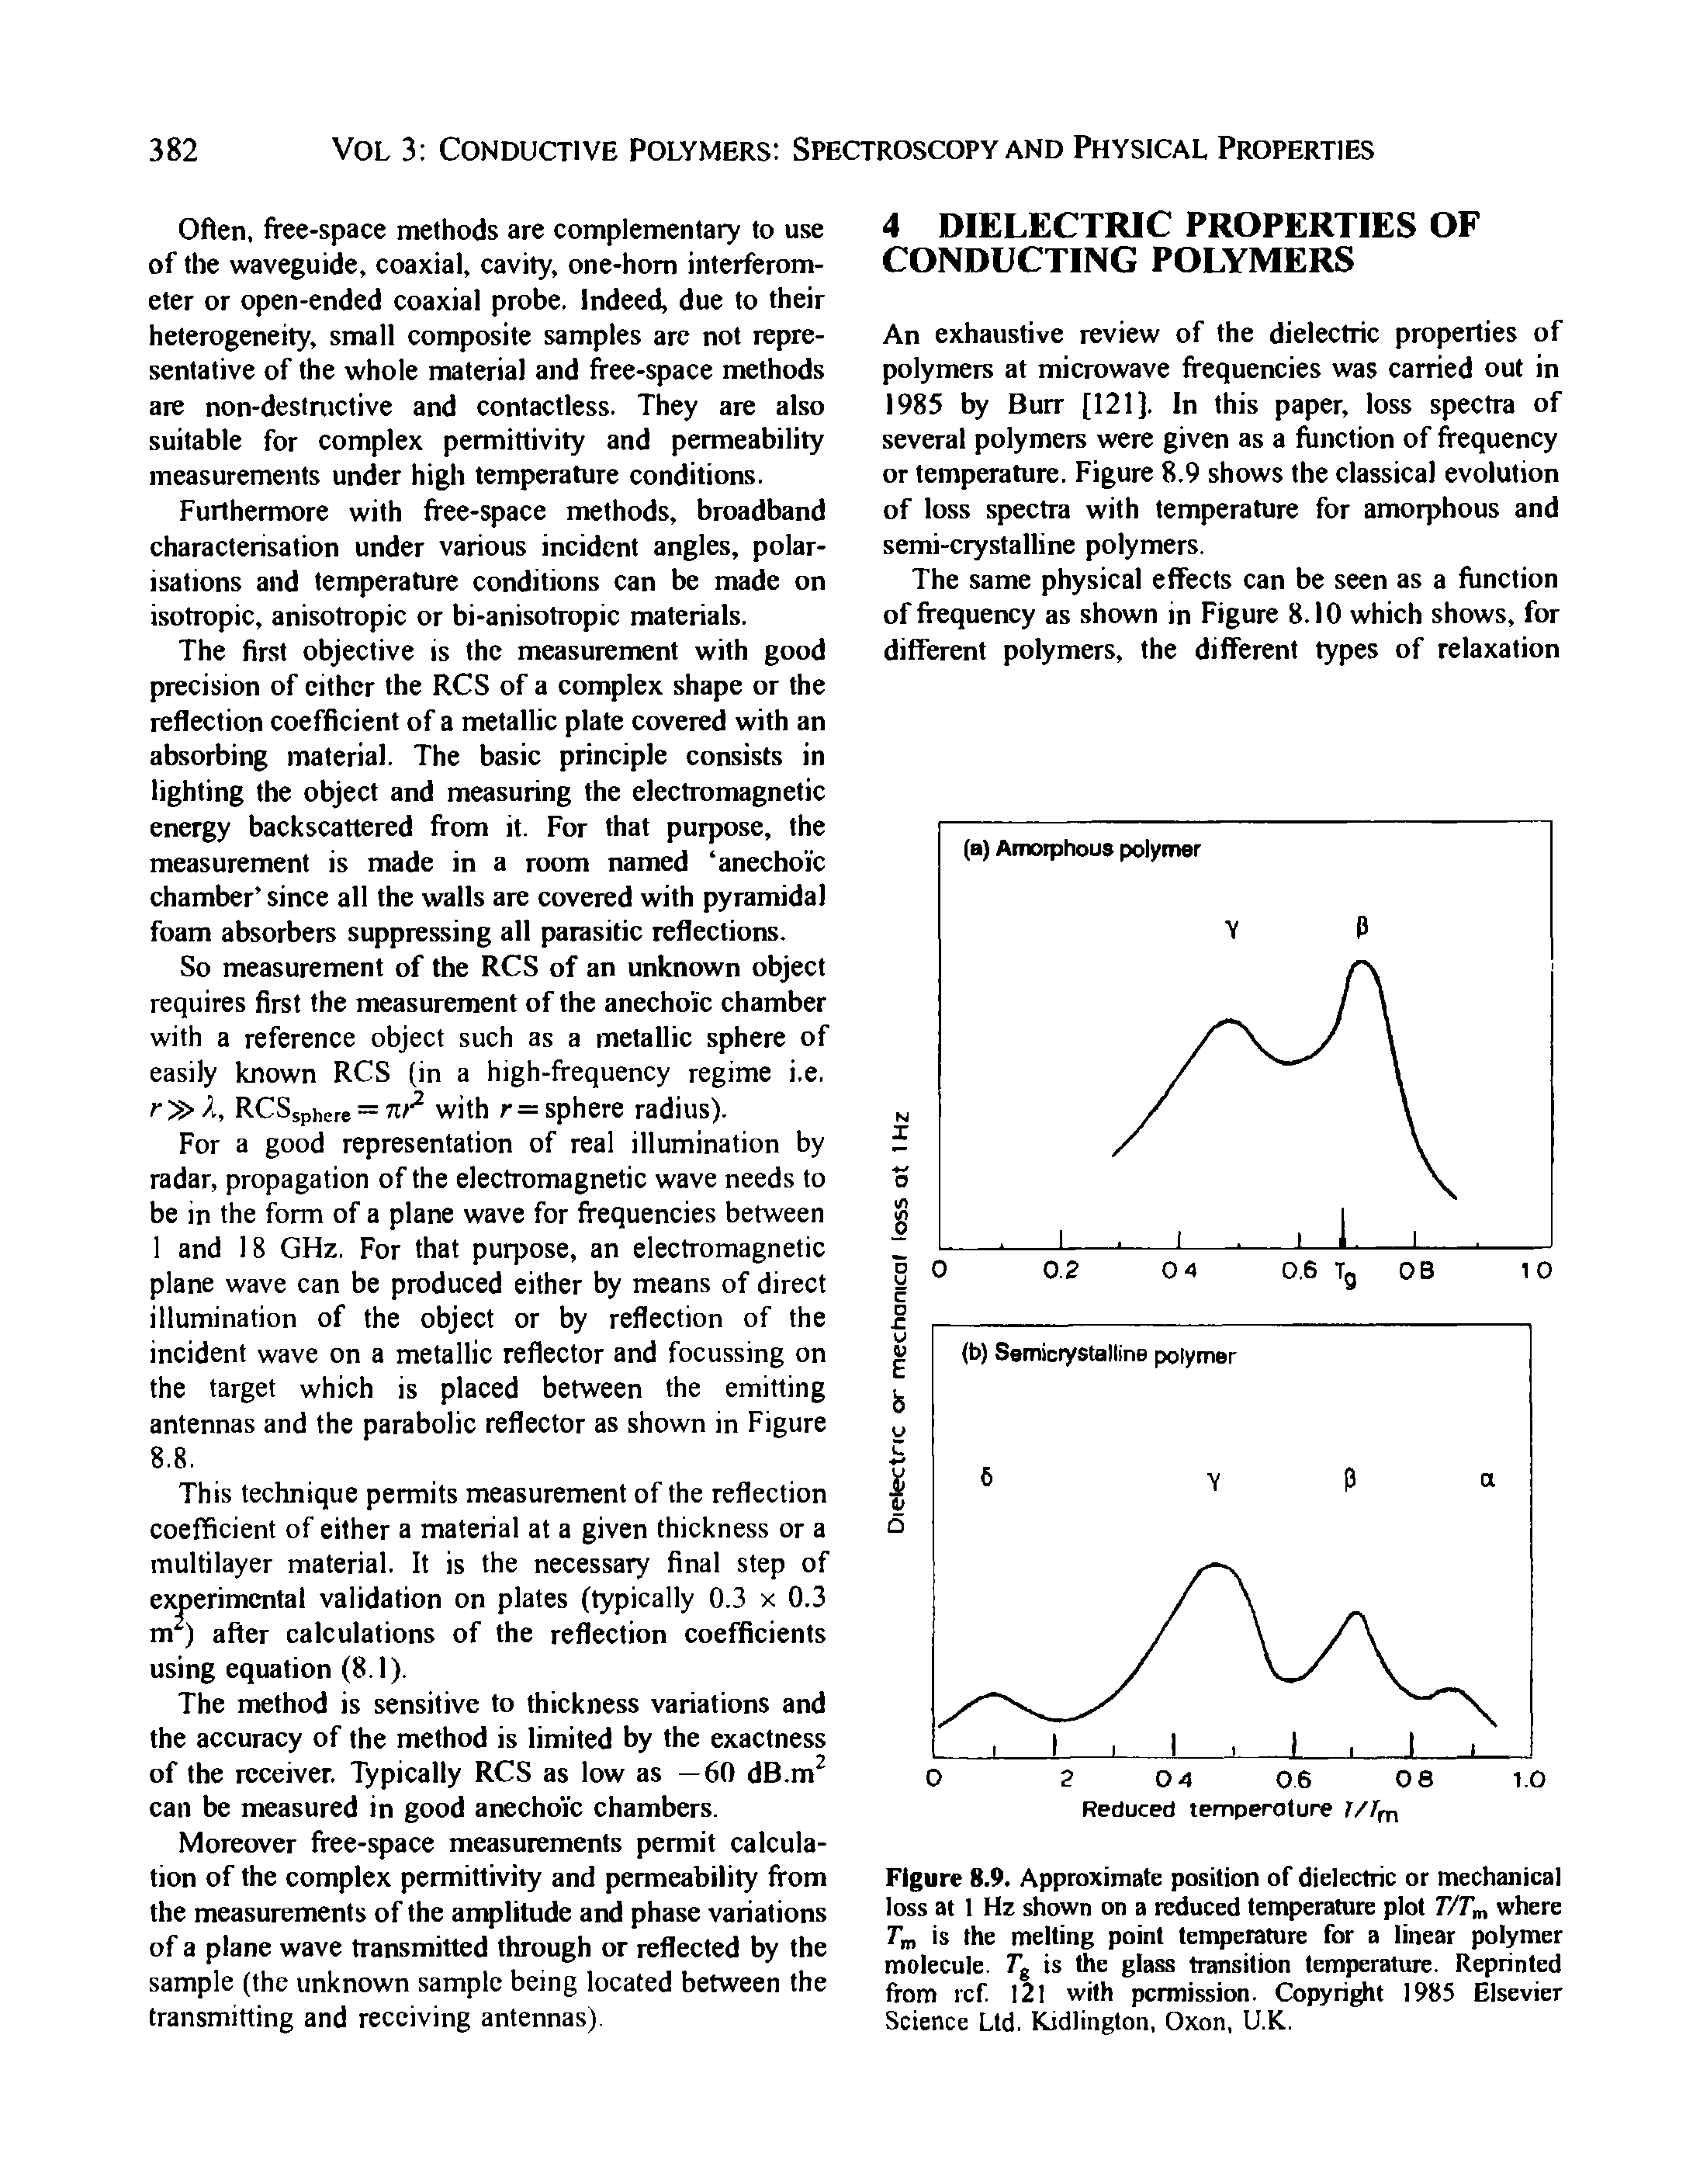 Figure 8.9. Approximate position of dielectric or mechanical loss at 1 Hz shown on a reduced temperature plot T/Tm where T is the melting point temperature for a linear polymer molecule. Tg is the glass transition temperature. Reprinted from ref. I2l with permission. Copyright 1985 Elsevier Science Ltd. Kidlington, Oxon, UK.